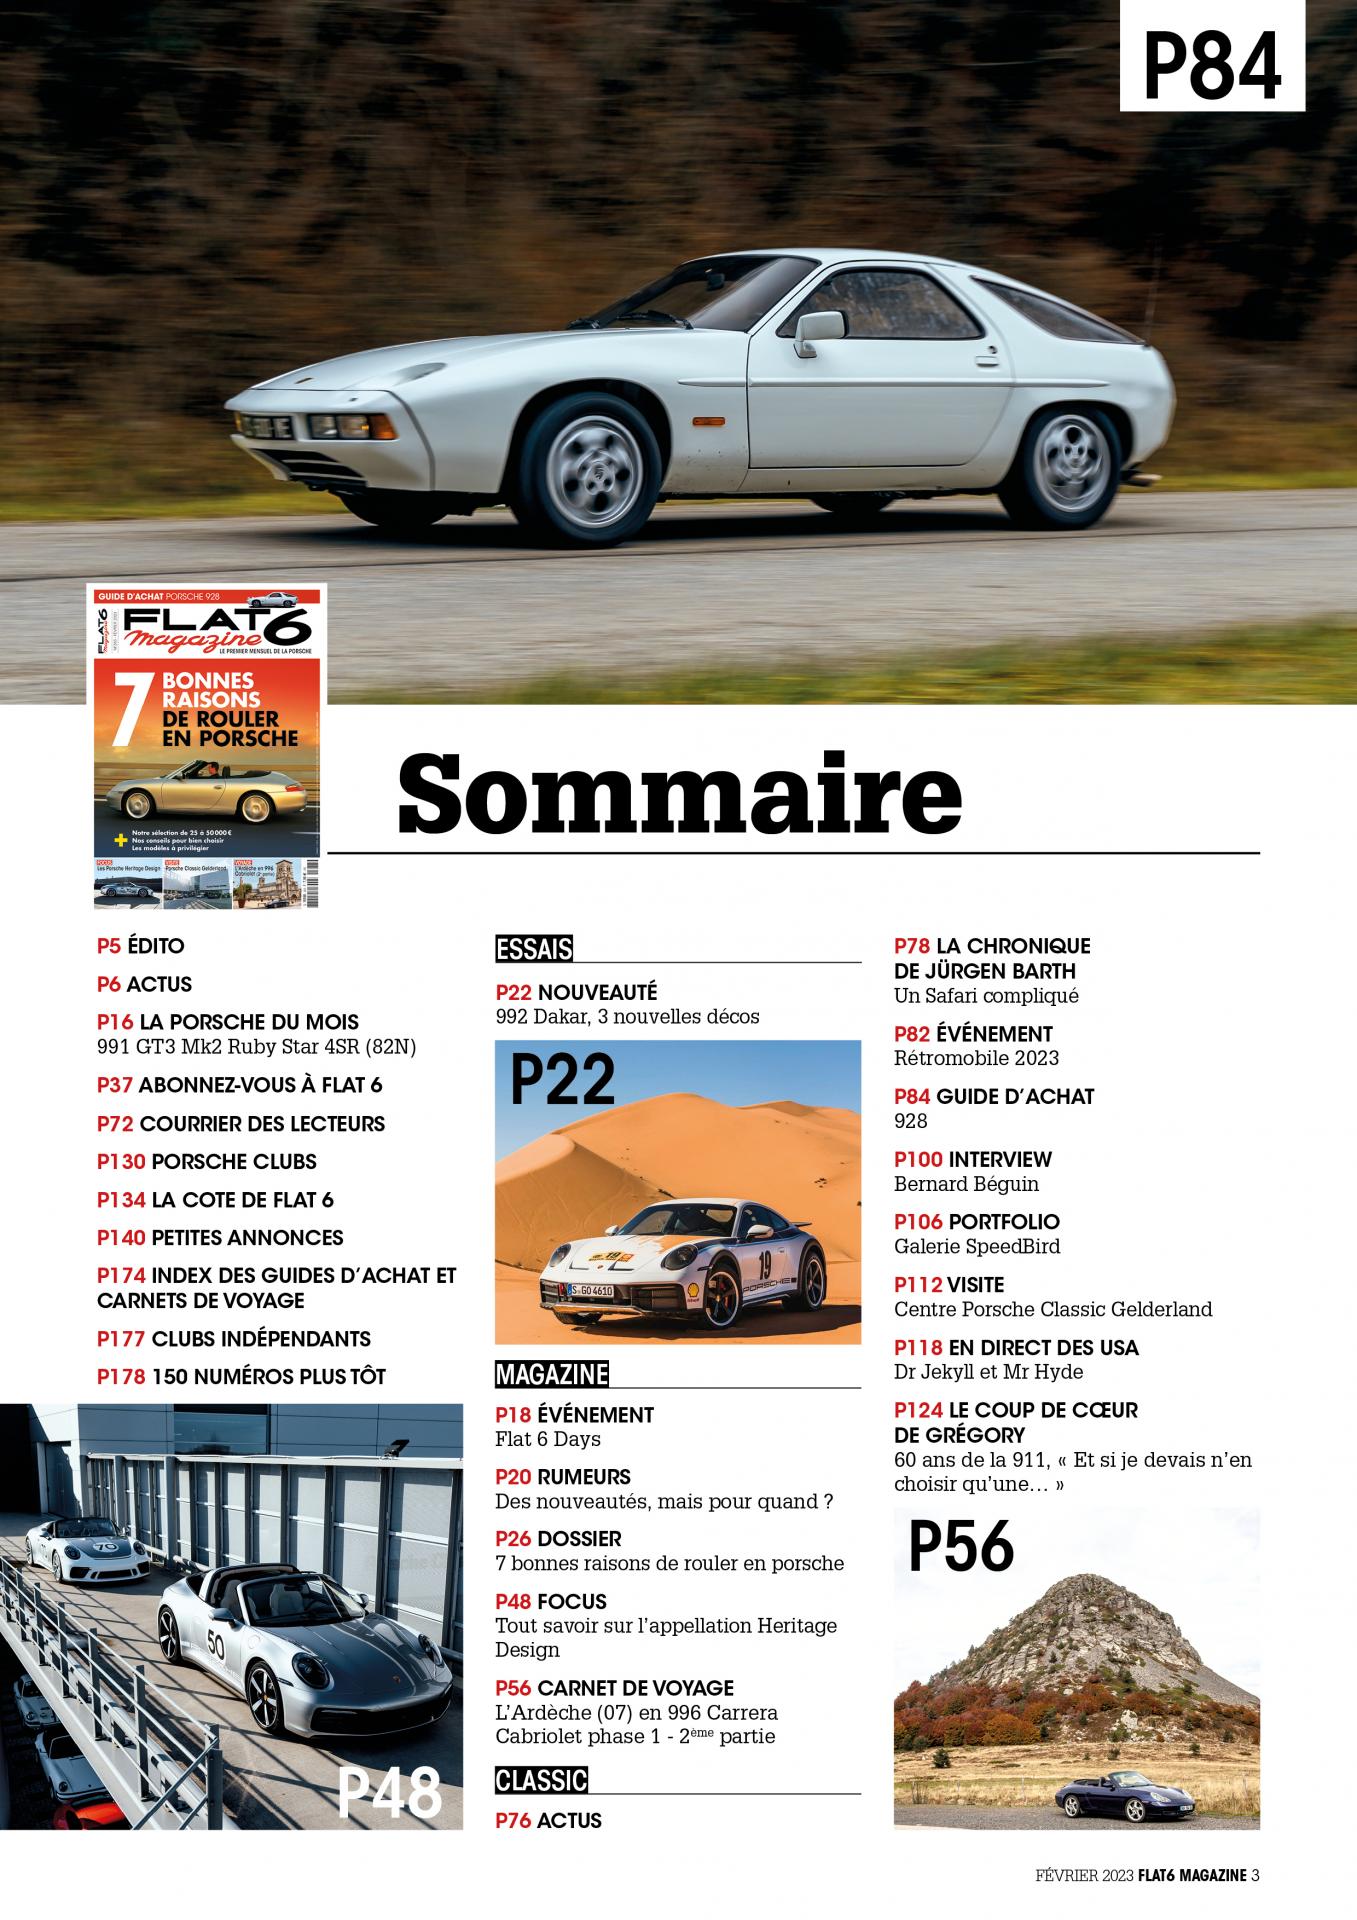 Sommaire383